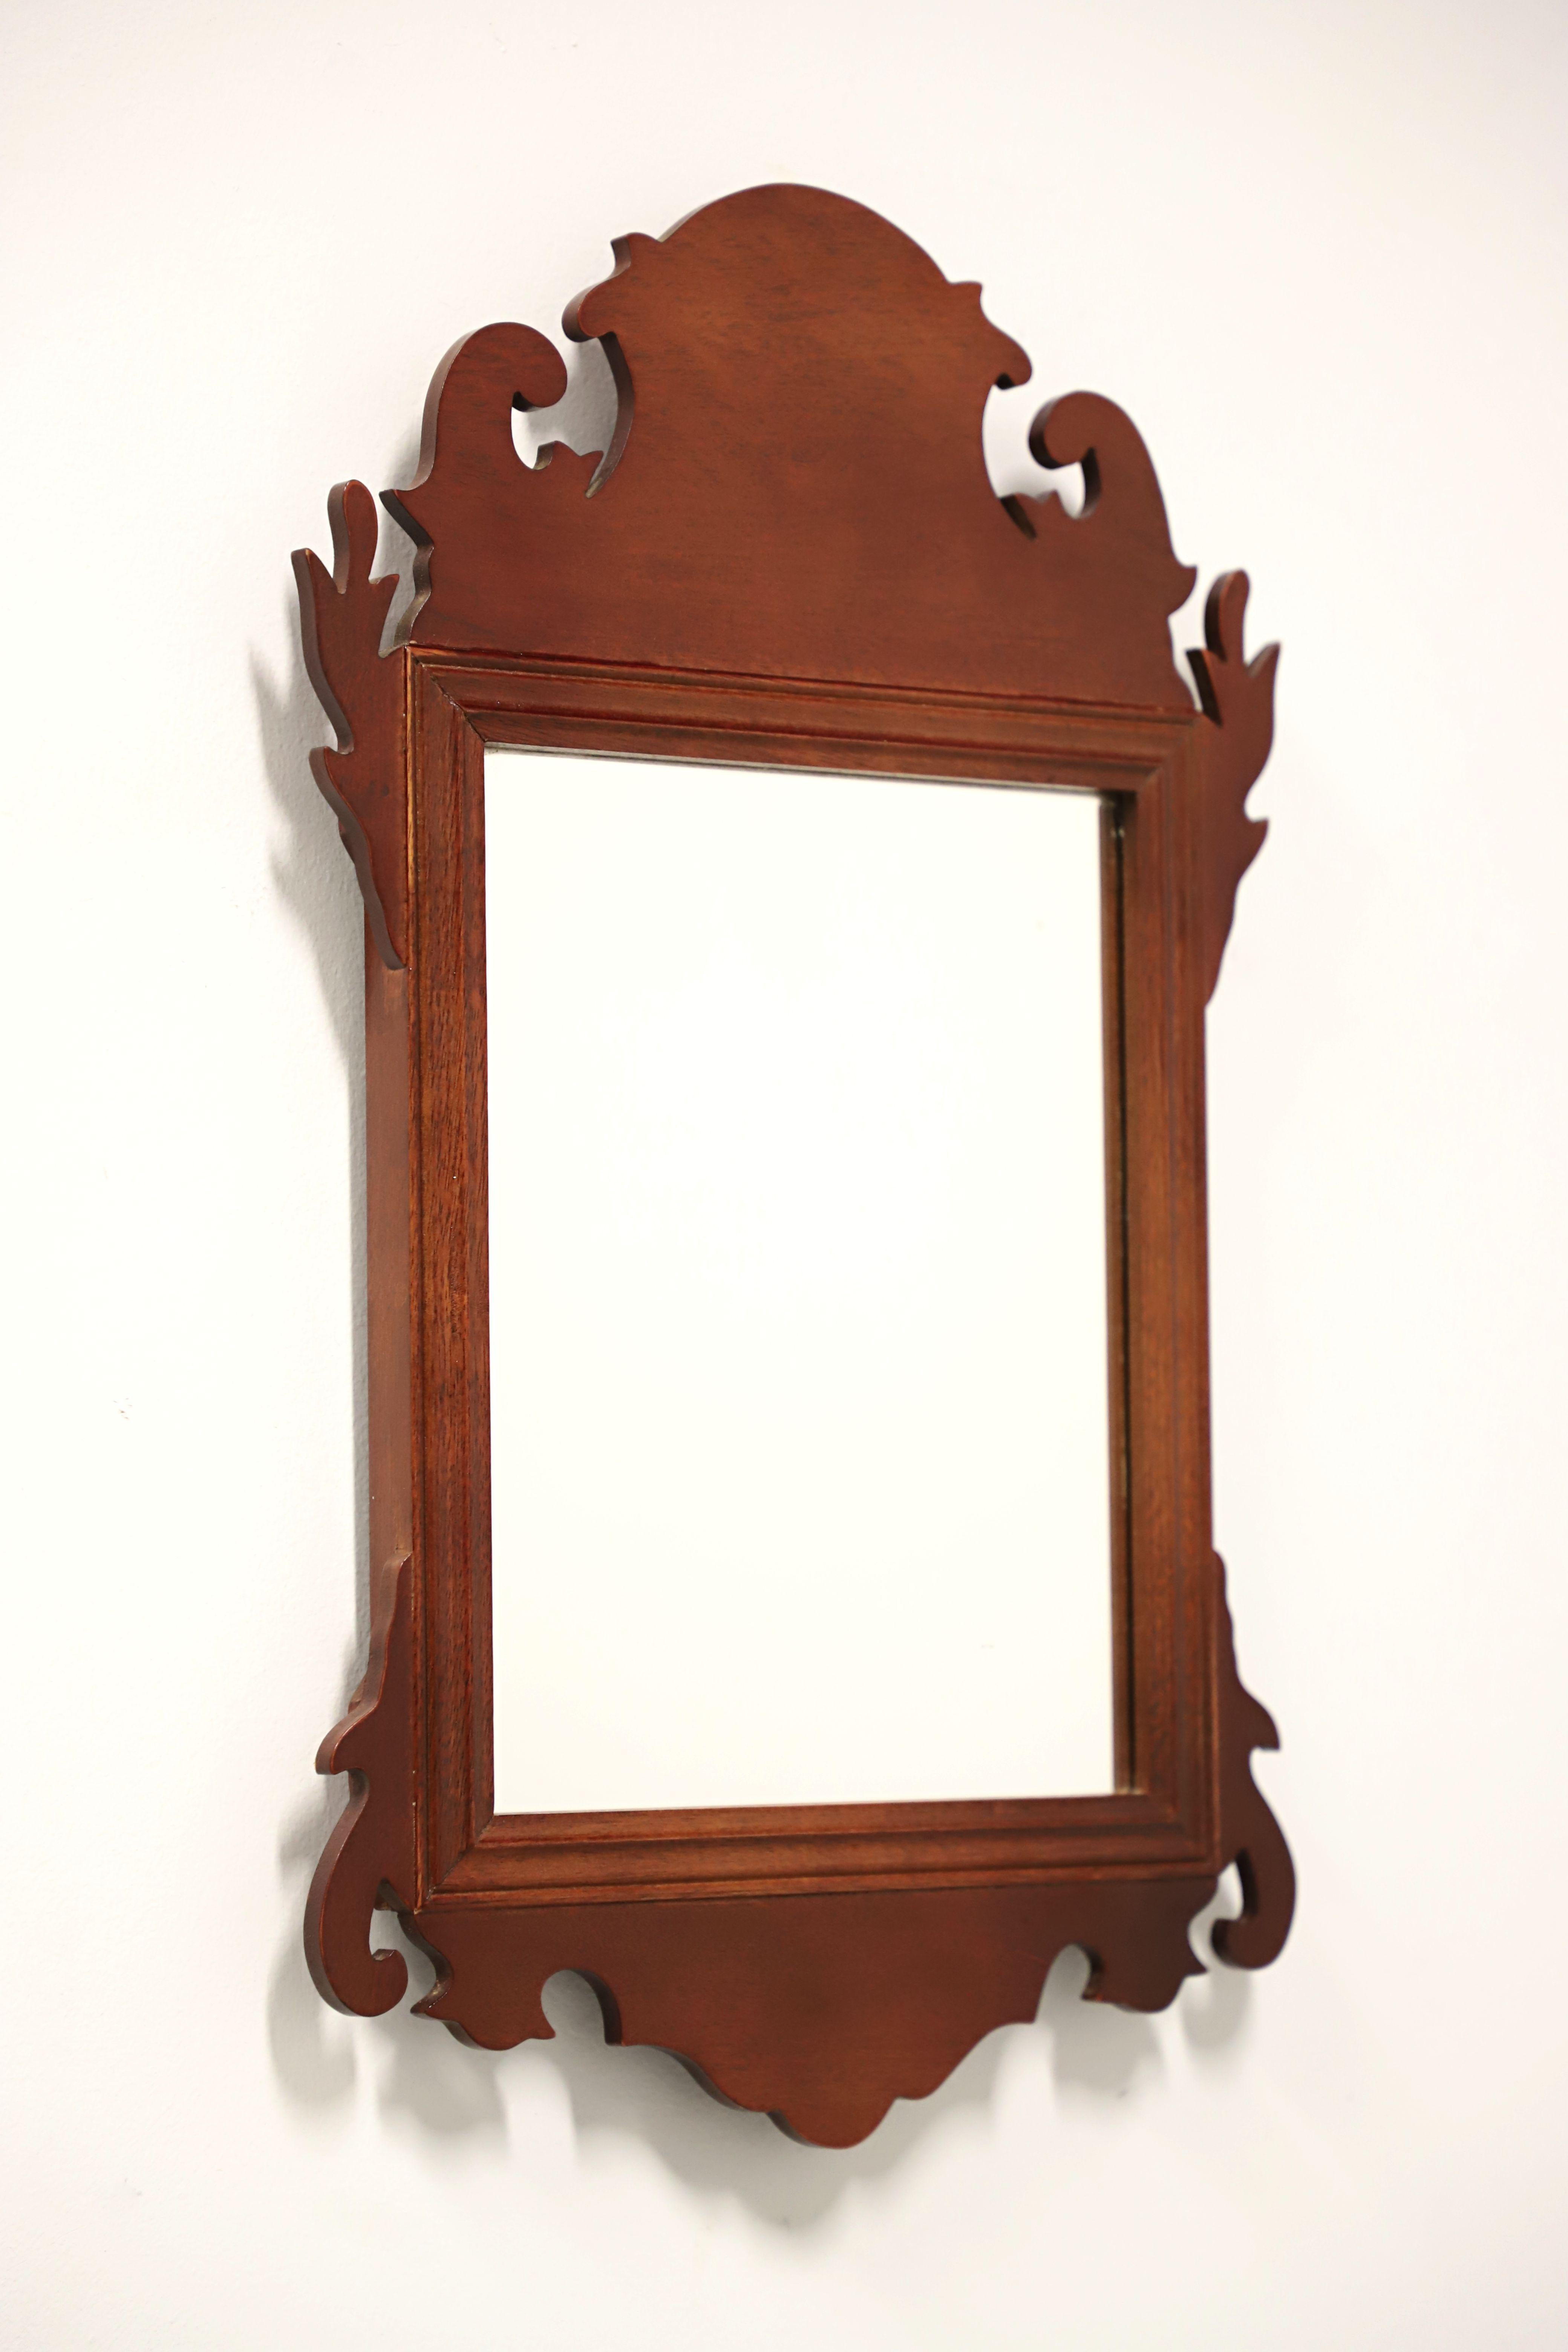 VIRGINIA METALCRAFTERS Mahogany Colonial Williamsburg Petite Wall Mirror For Sale 3